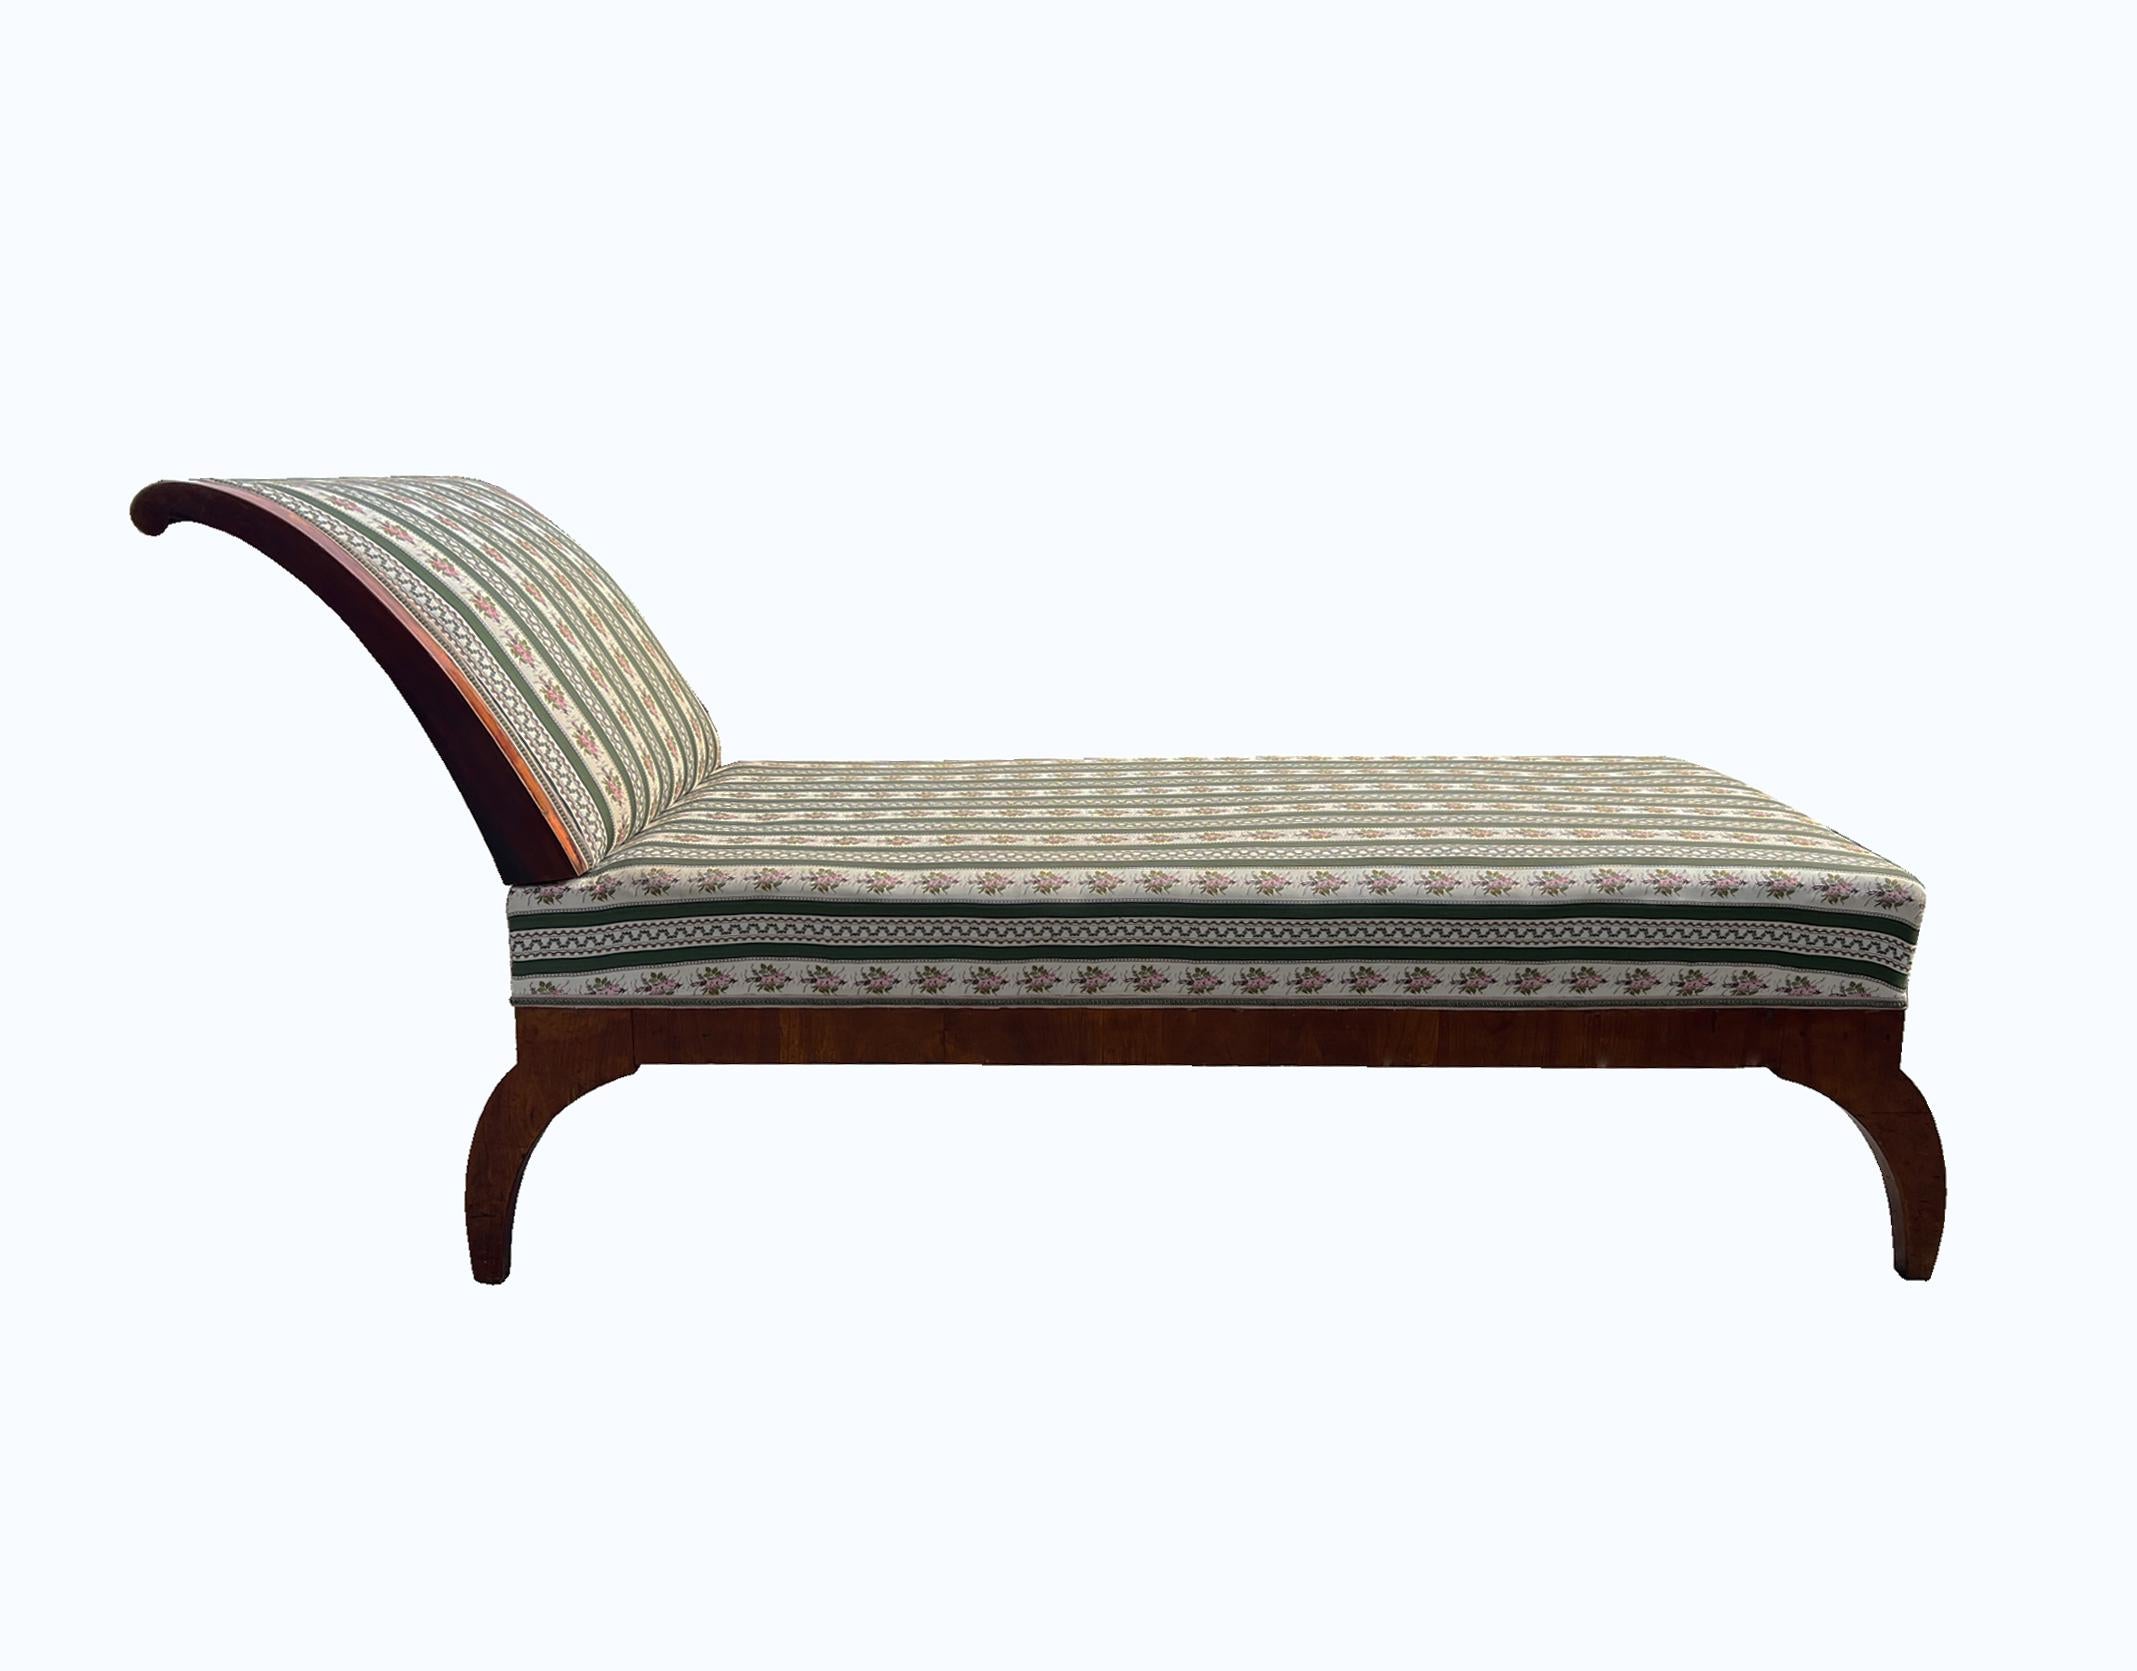 Polished 19th Century Biedermeier Cherry Daybed. Vienna, c. 1820-25. For Sale